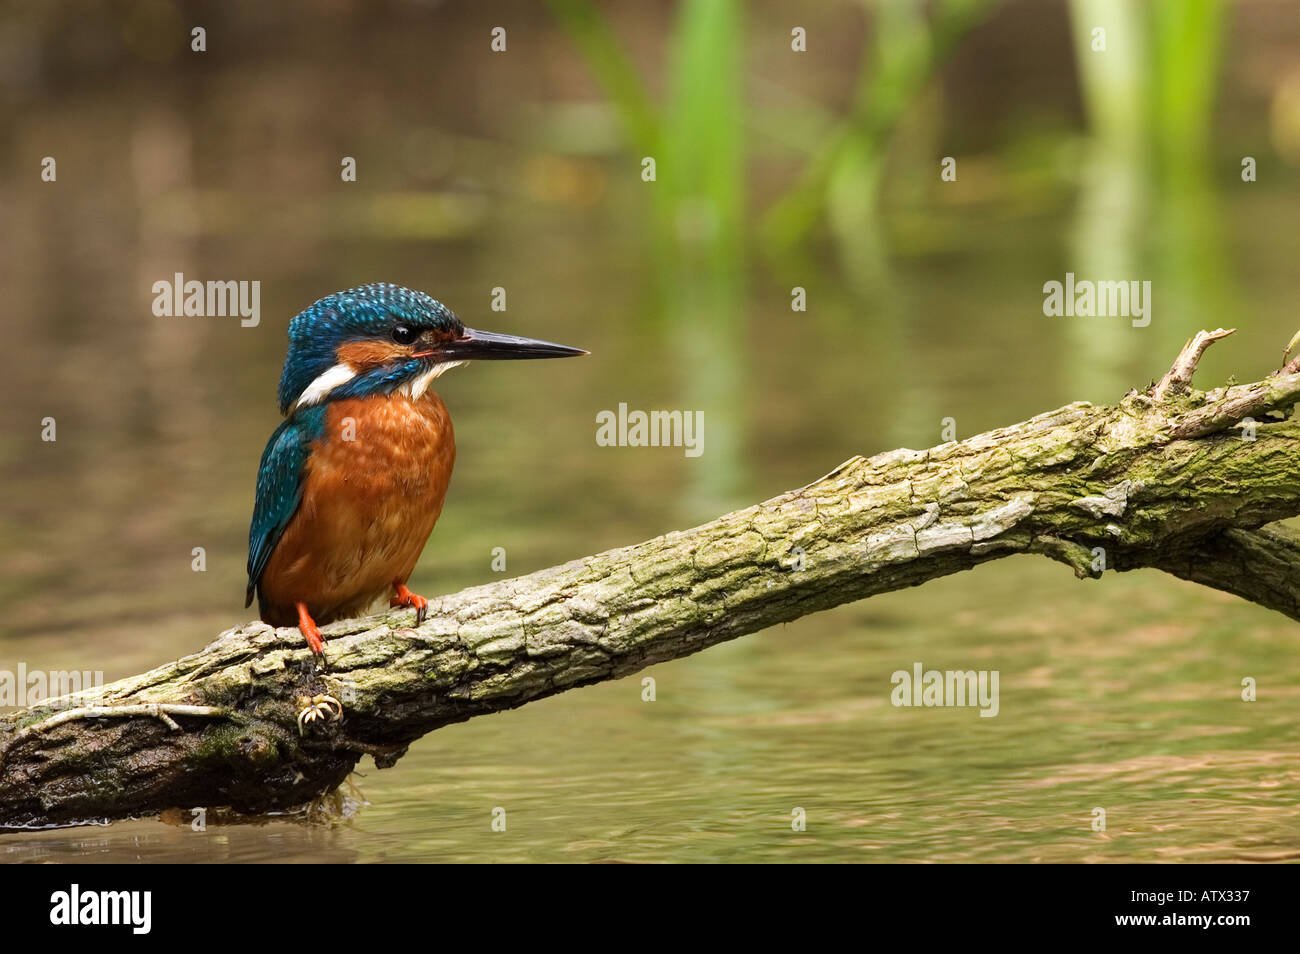 Kingfisher on a branch low to water Stock Photo